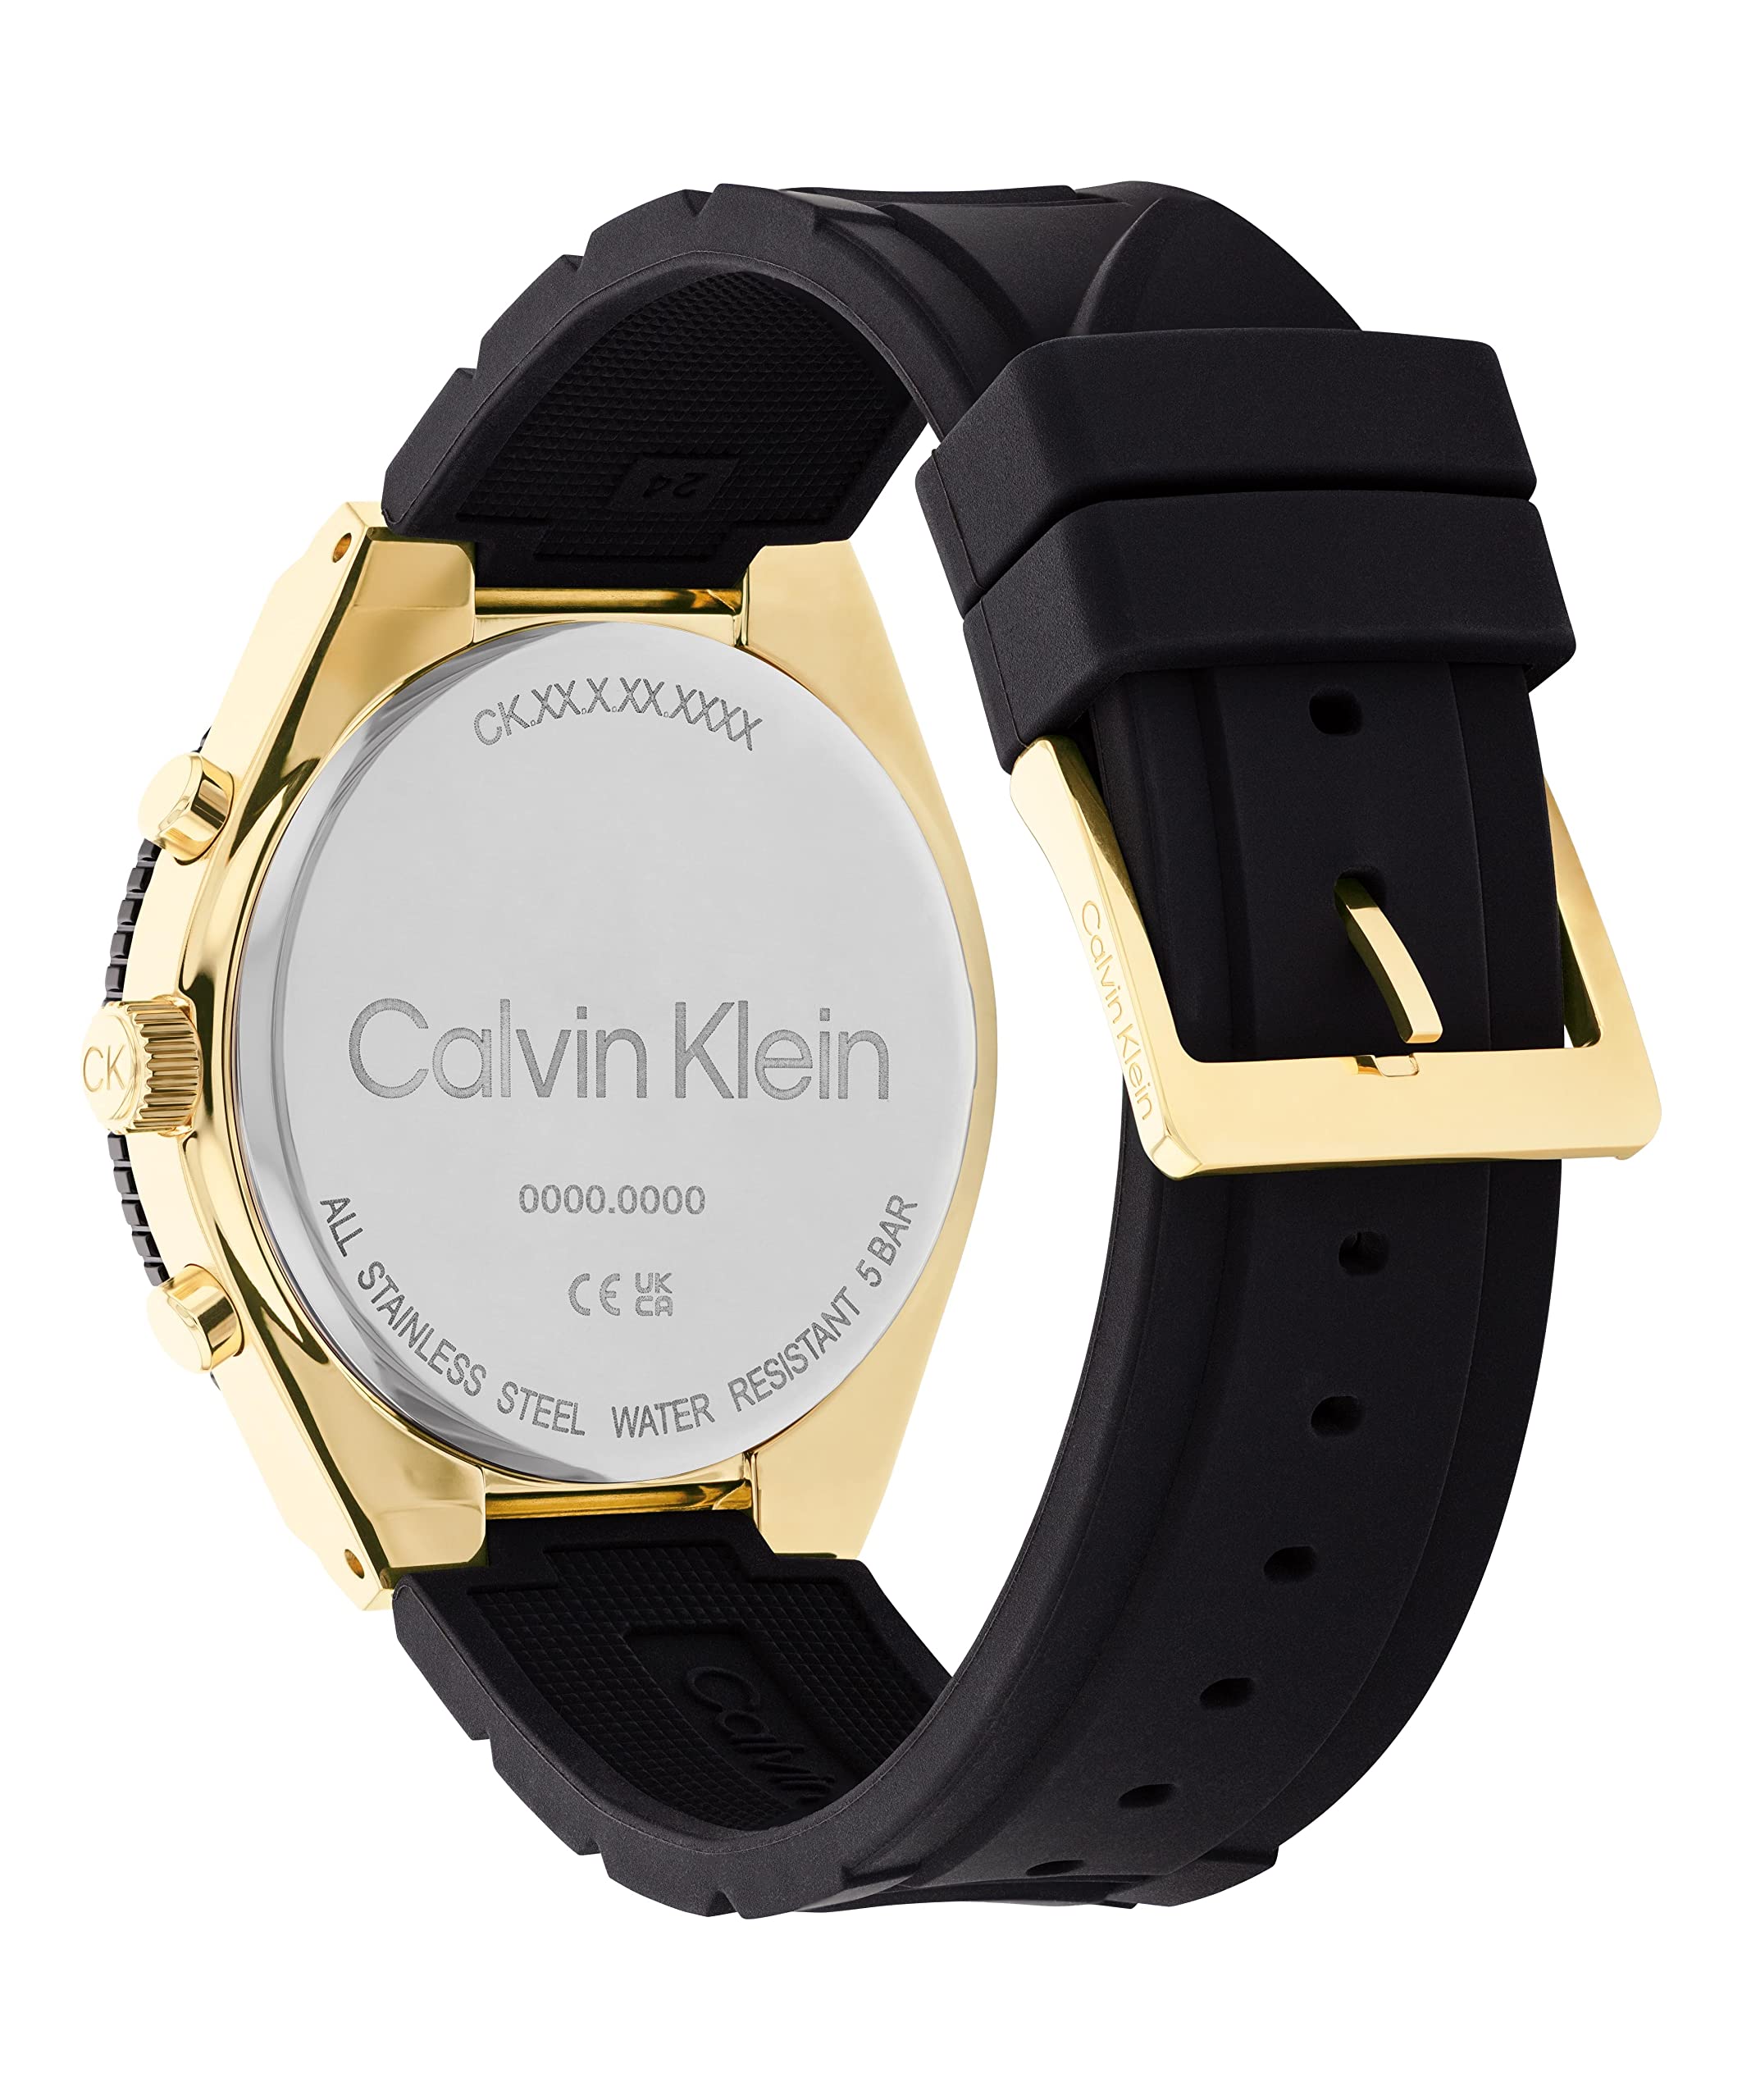 Calvin Klein Men's Quartz 25200306 Ionic Plated Thin Gold Steel and Silicone Strap Watch, Color: Black